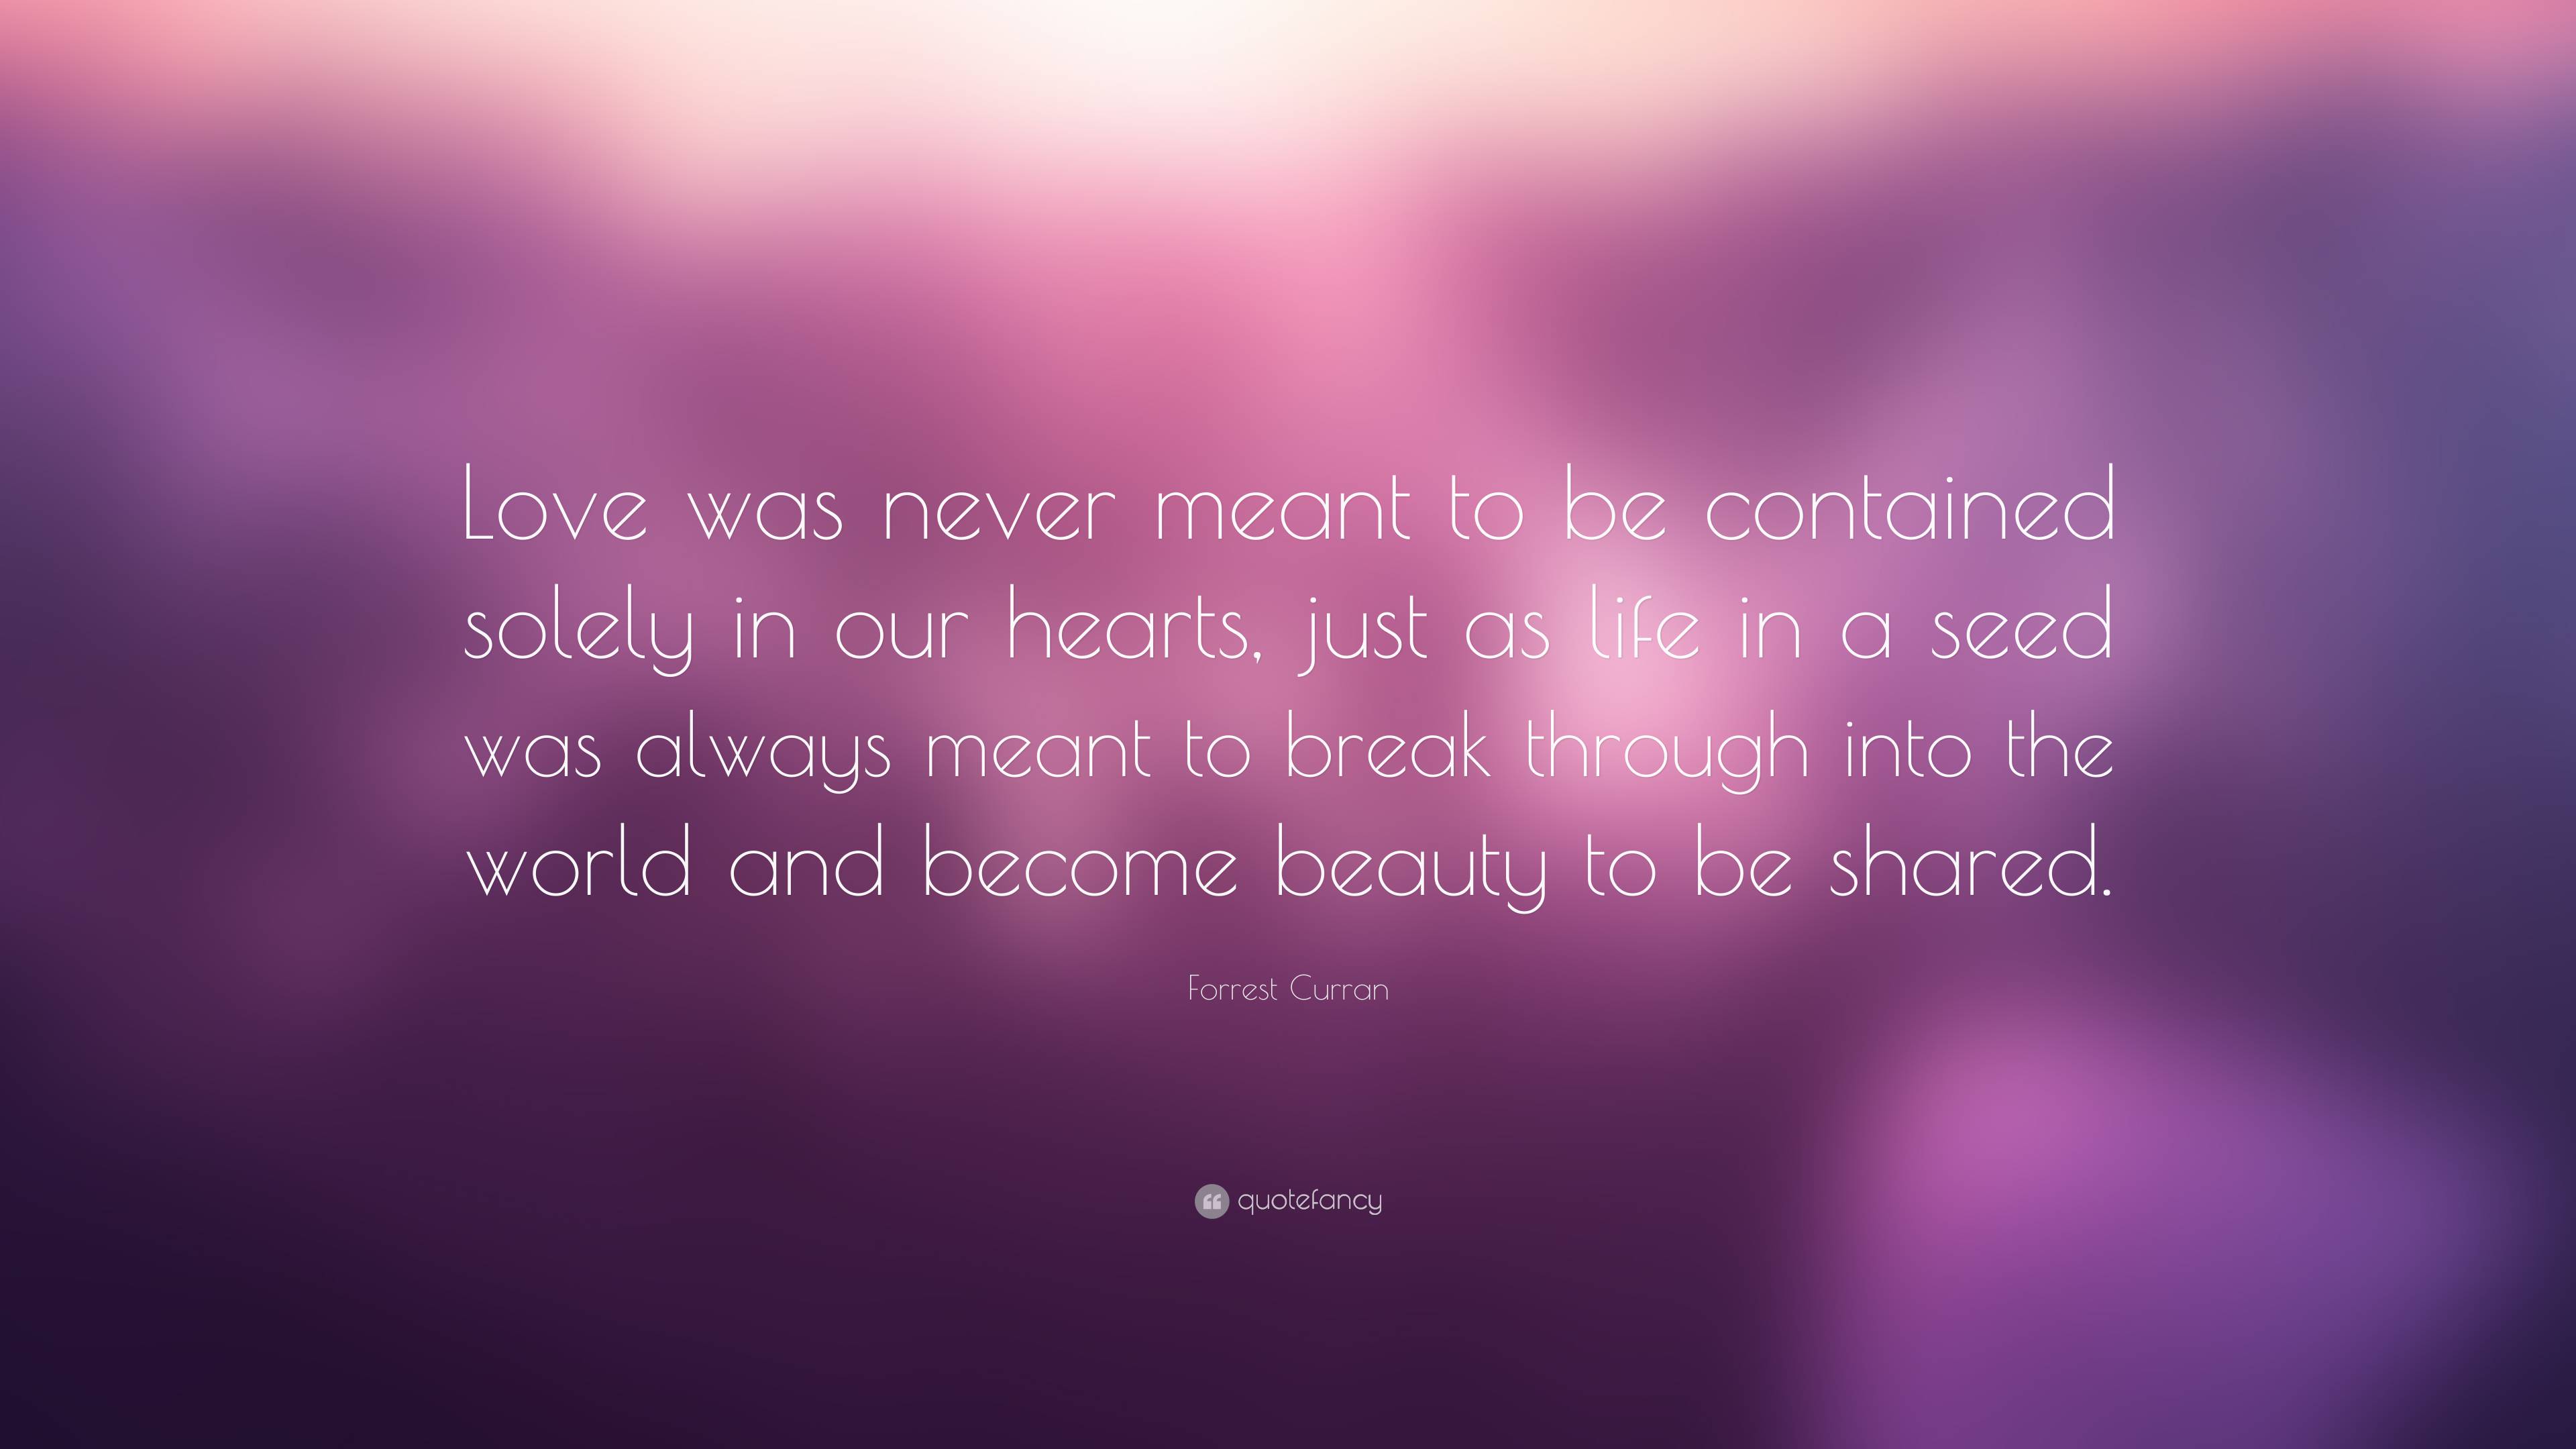 Forrest Curran Quote: “Love was never meant to be contained solely in ...